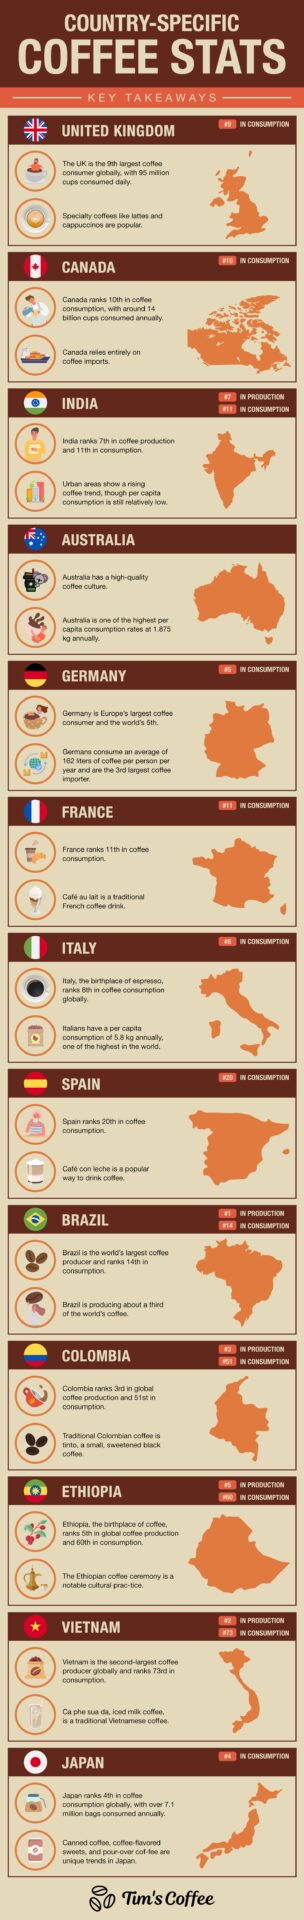 country specific coffee stats